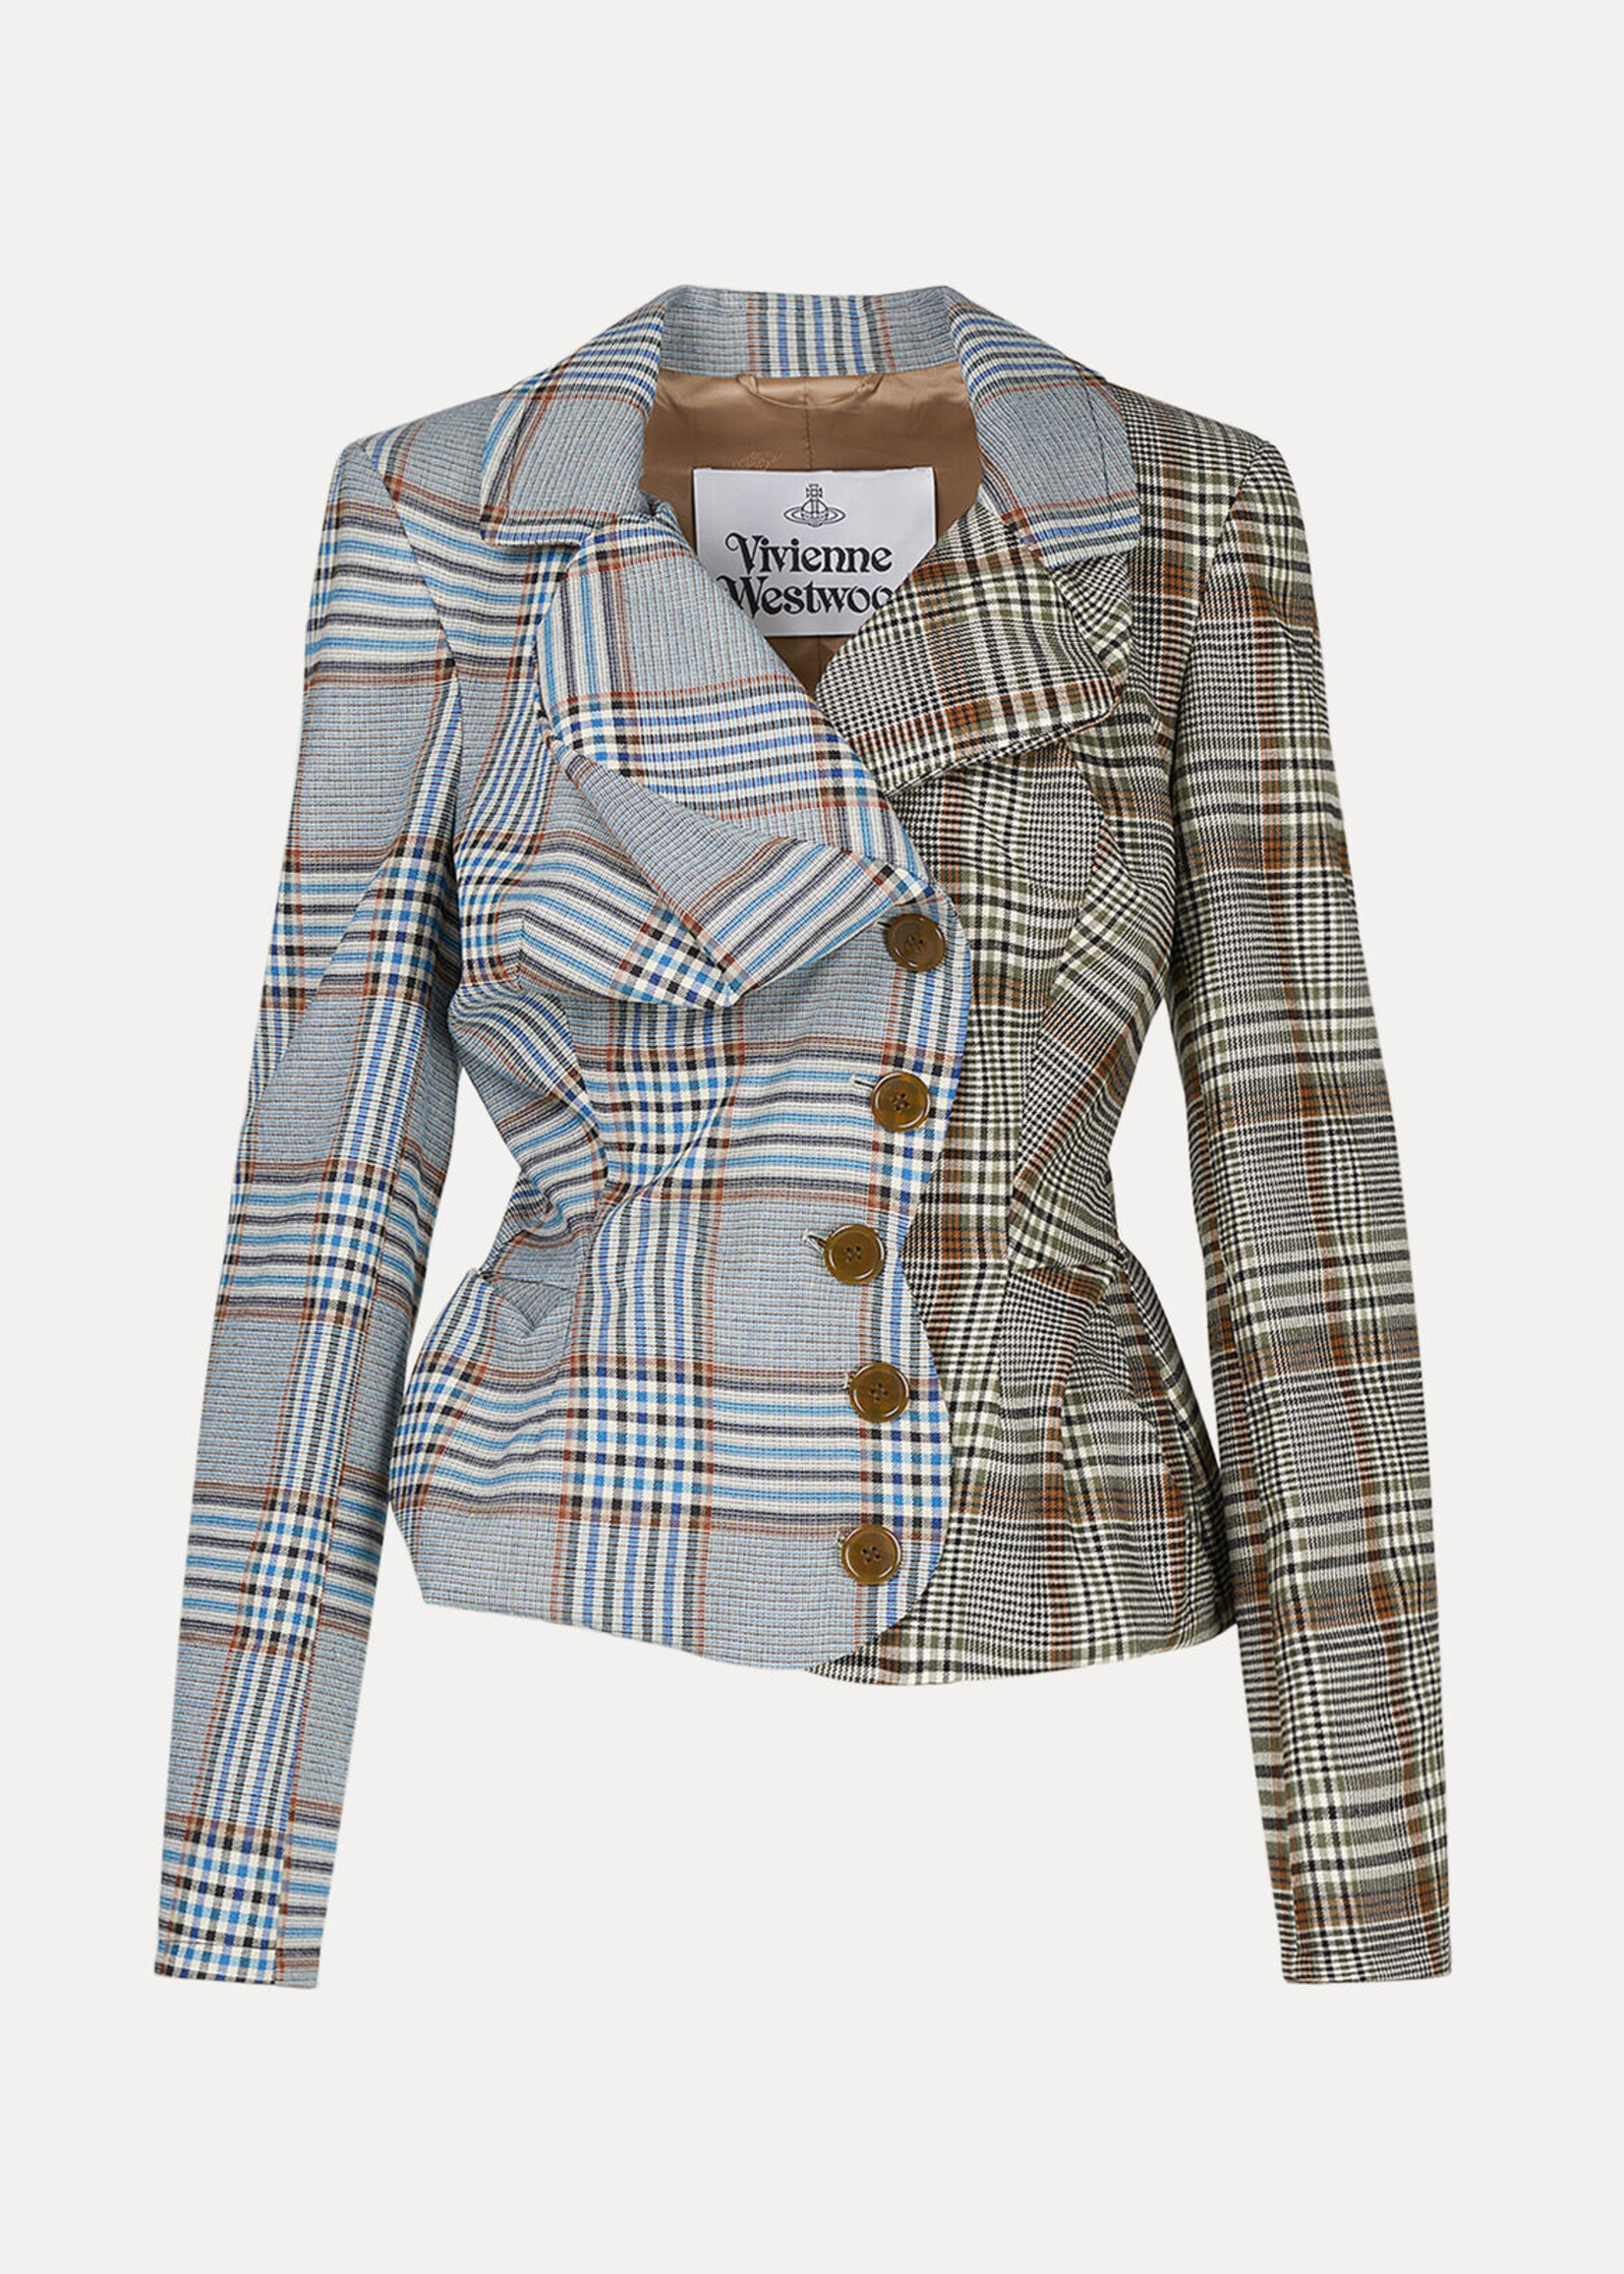 Vivienne Westwood Drunken Tailored Jacket in Mixed Plaid - NOW OR